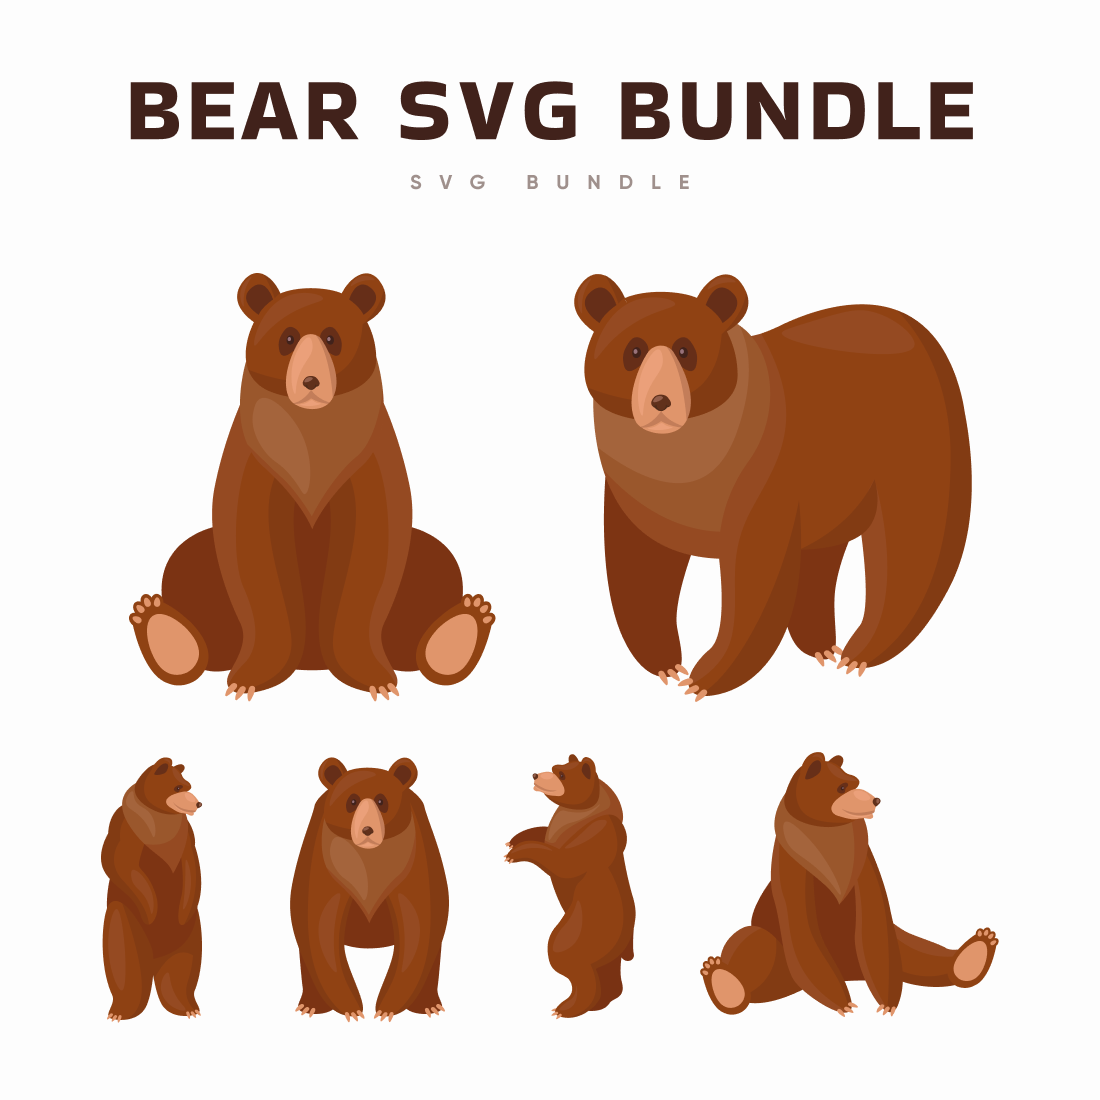 Bear svg bundle is shown here.